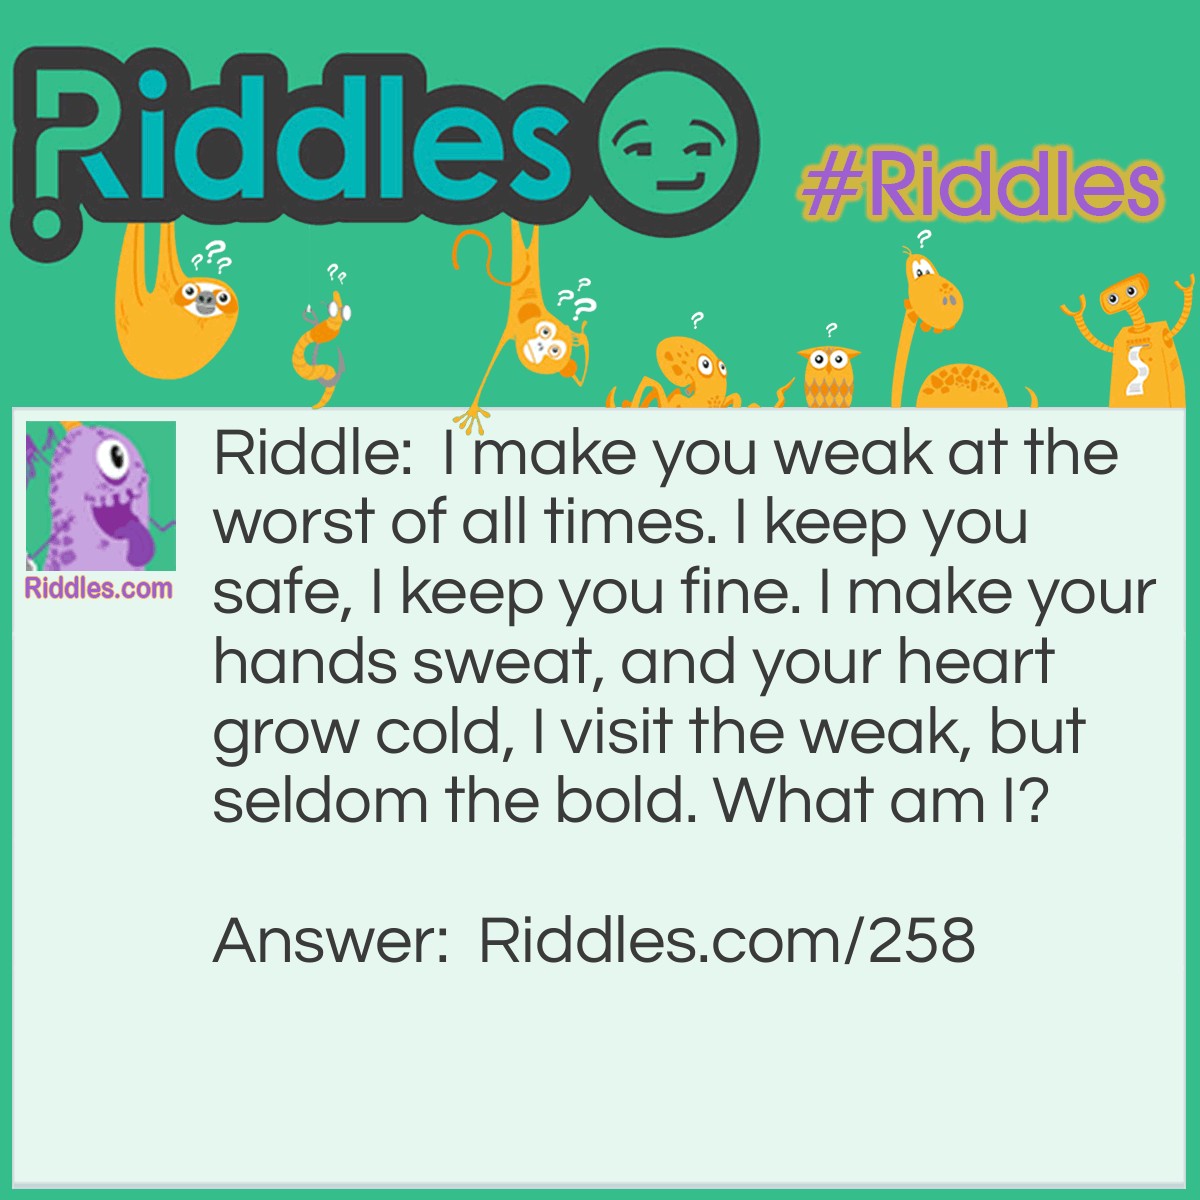 Riddle: I make you weak at the worst of all times. I keep you safe, I keep you fine. I make your hands sweat, and your heart grow cold, I visit the weak, but seldom the bold. What am I? Answer: Your fears.